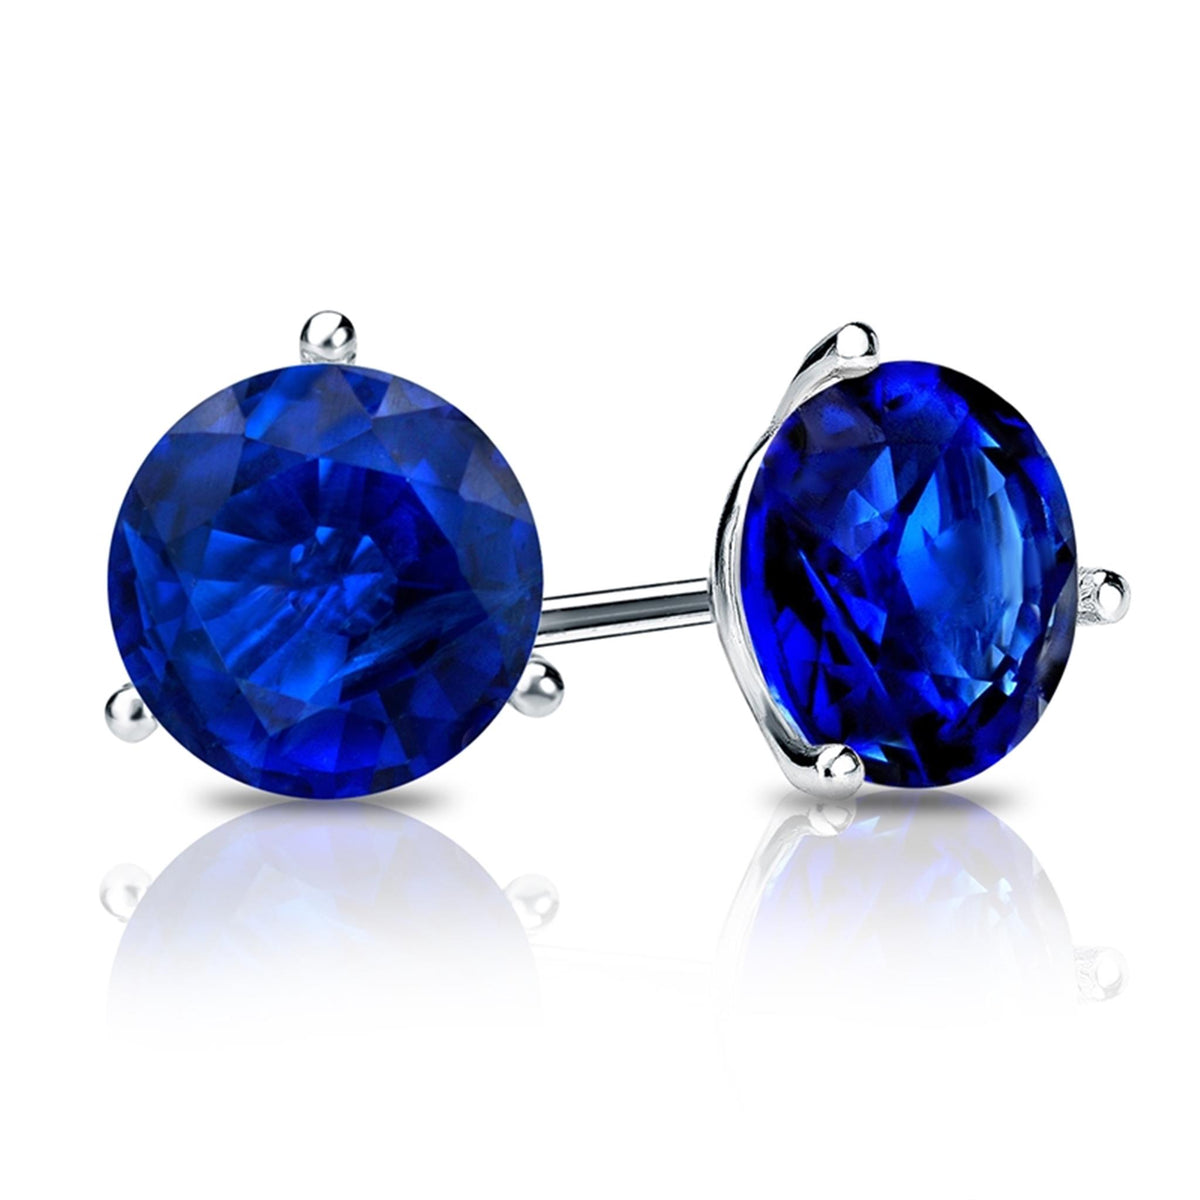 14Kt White Gold Classic Stud Earrings Gemstone Earrings With 1.34ct Chatham Blue Sapphires